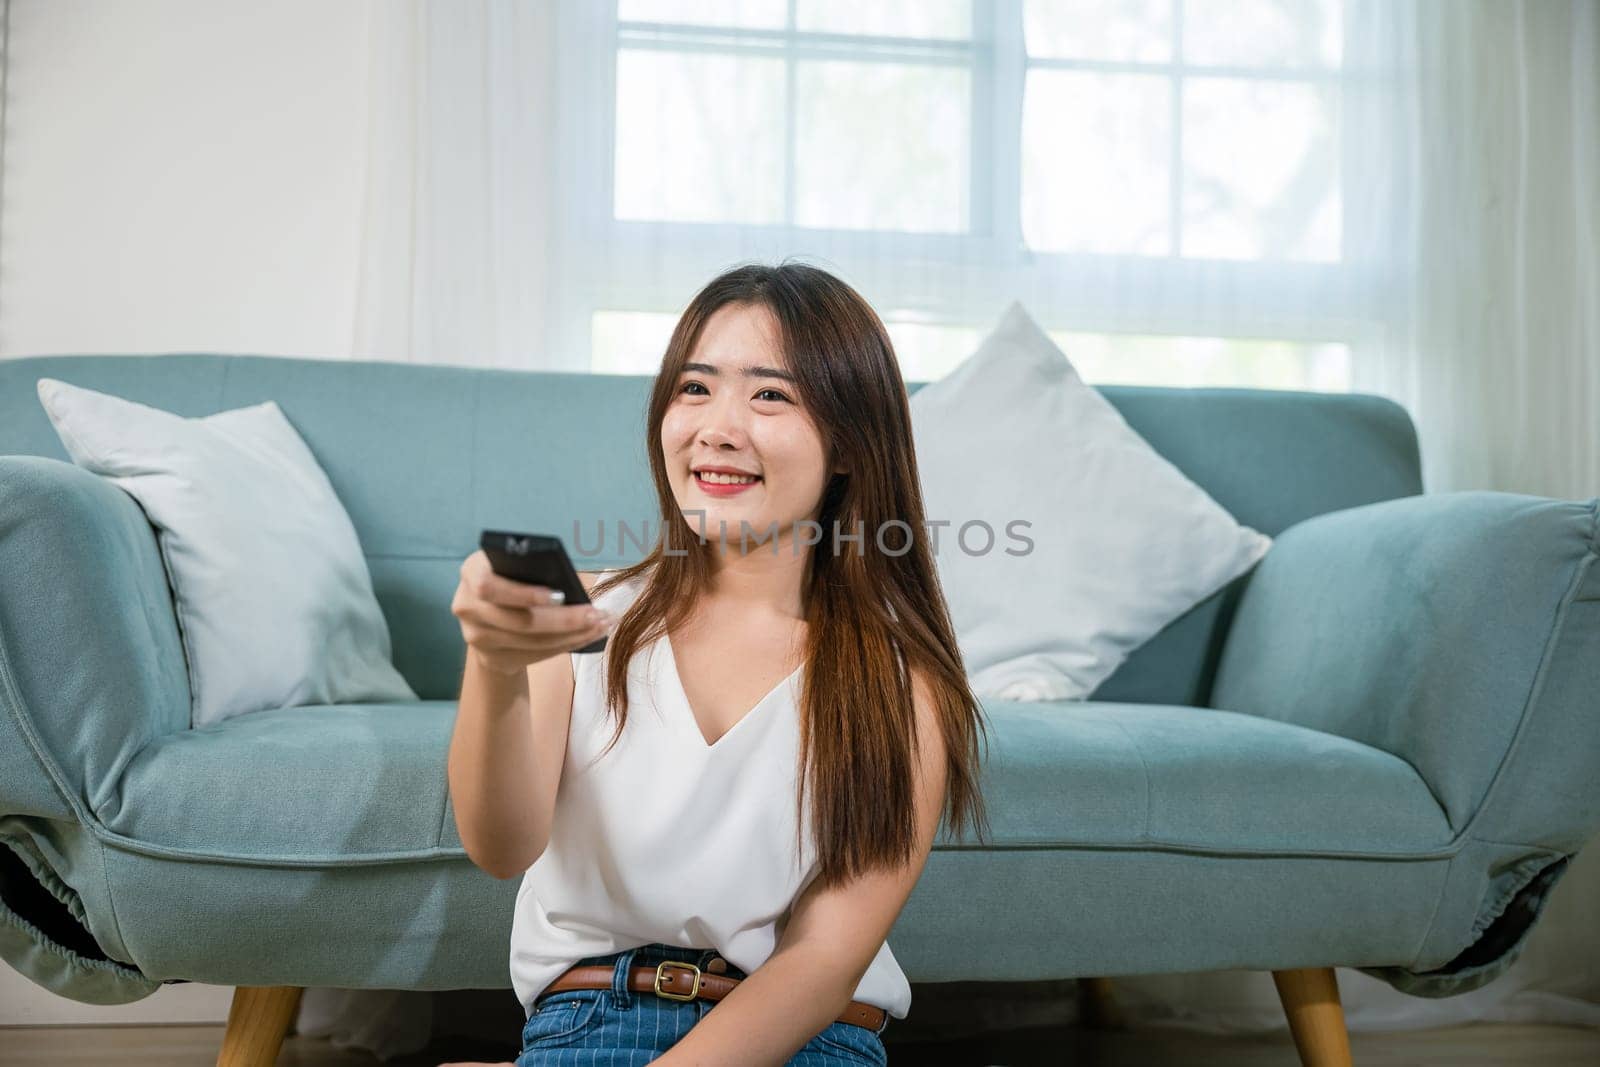 Happy female fun comedy video holding remote watching television, Asian young woman smiling sitting relaxing watch TV holding remote control on sofa in living room, Activity lifestyles concept